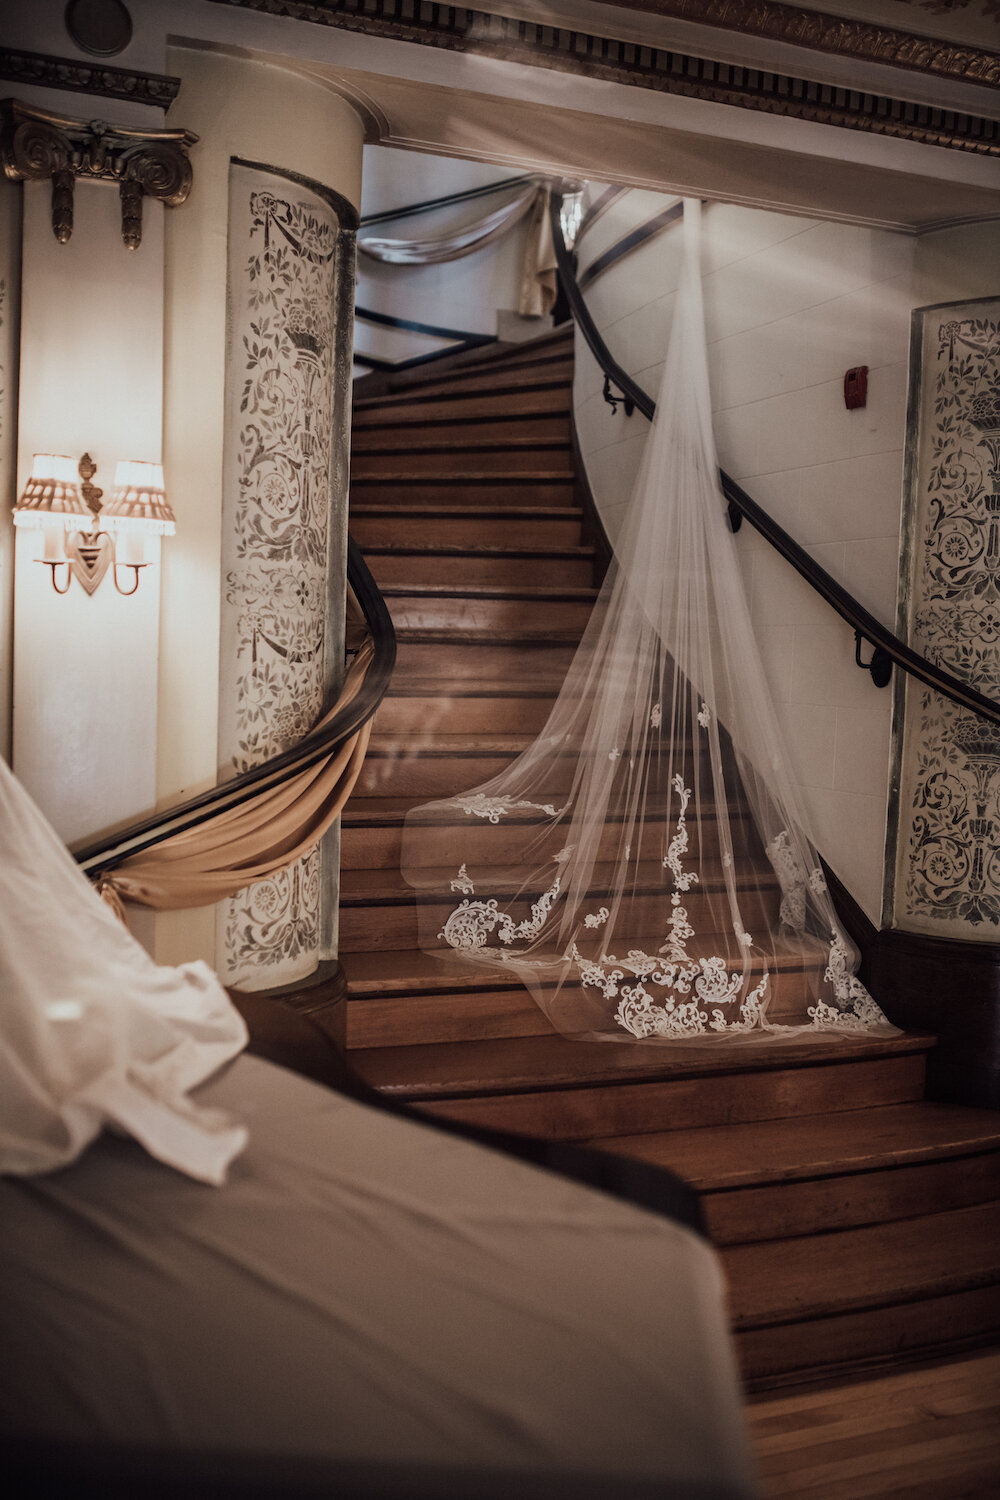 Victoria and Marco's Moody Grand Island Mansion Wedding